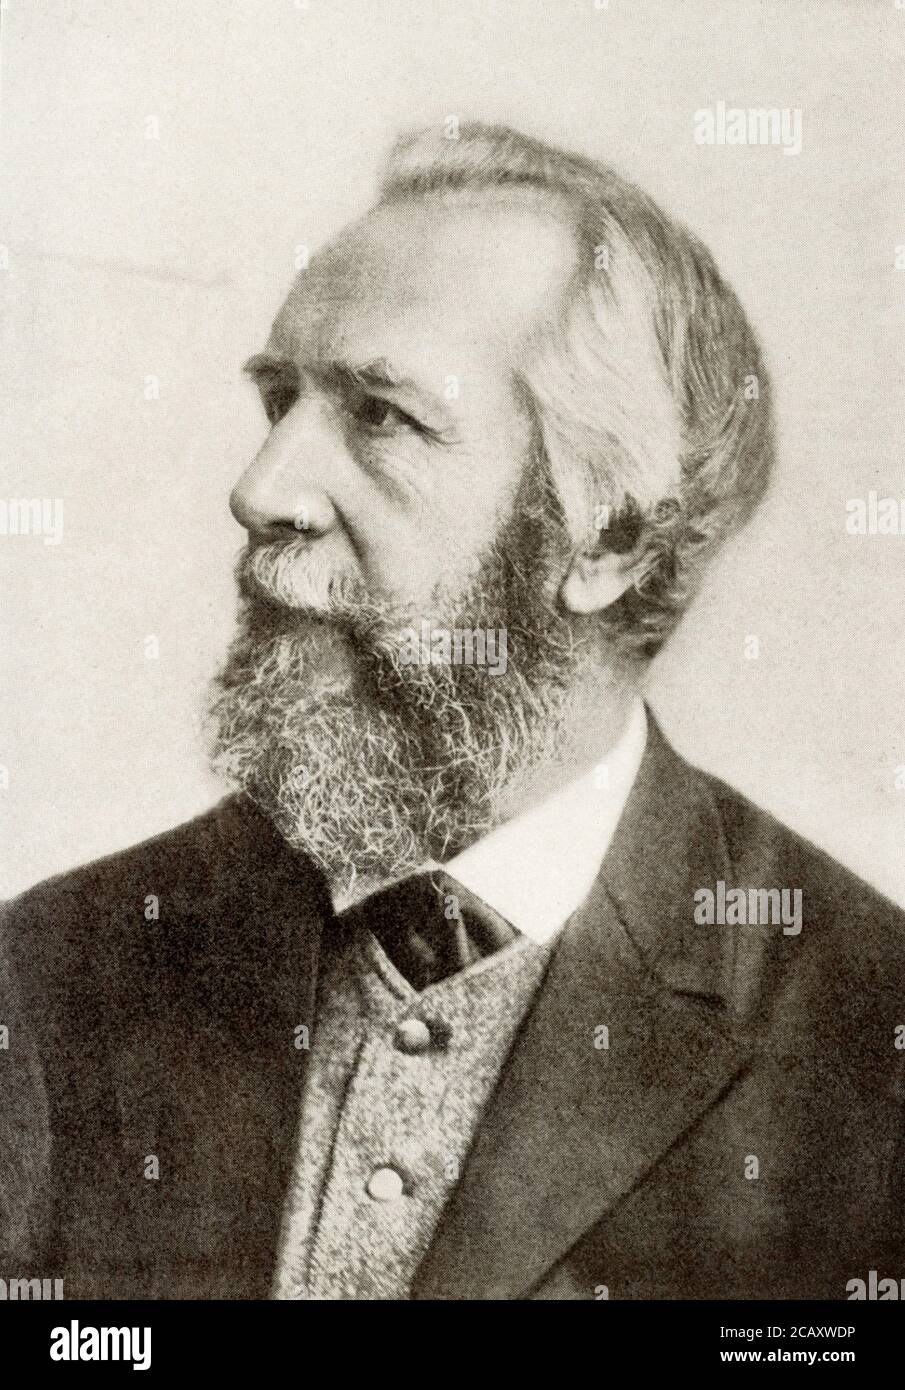 Ernst Haeckel (Ernst Heinrich Philipp August Haeckel) was born Feb. 16, 1834, in Potsdam, Prussia [Germany]). He died Aug. 9, 1919, in Jena, Germany. A German zoologist and evolutionist, he was a strong proponent of Darwinism and proposed new notions of the evolutionary descent of human beings. Stock Photo